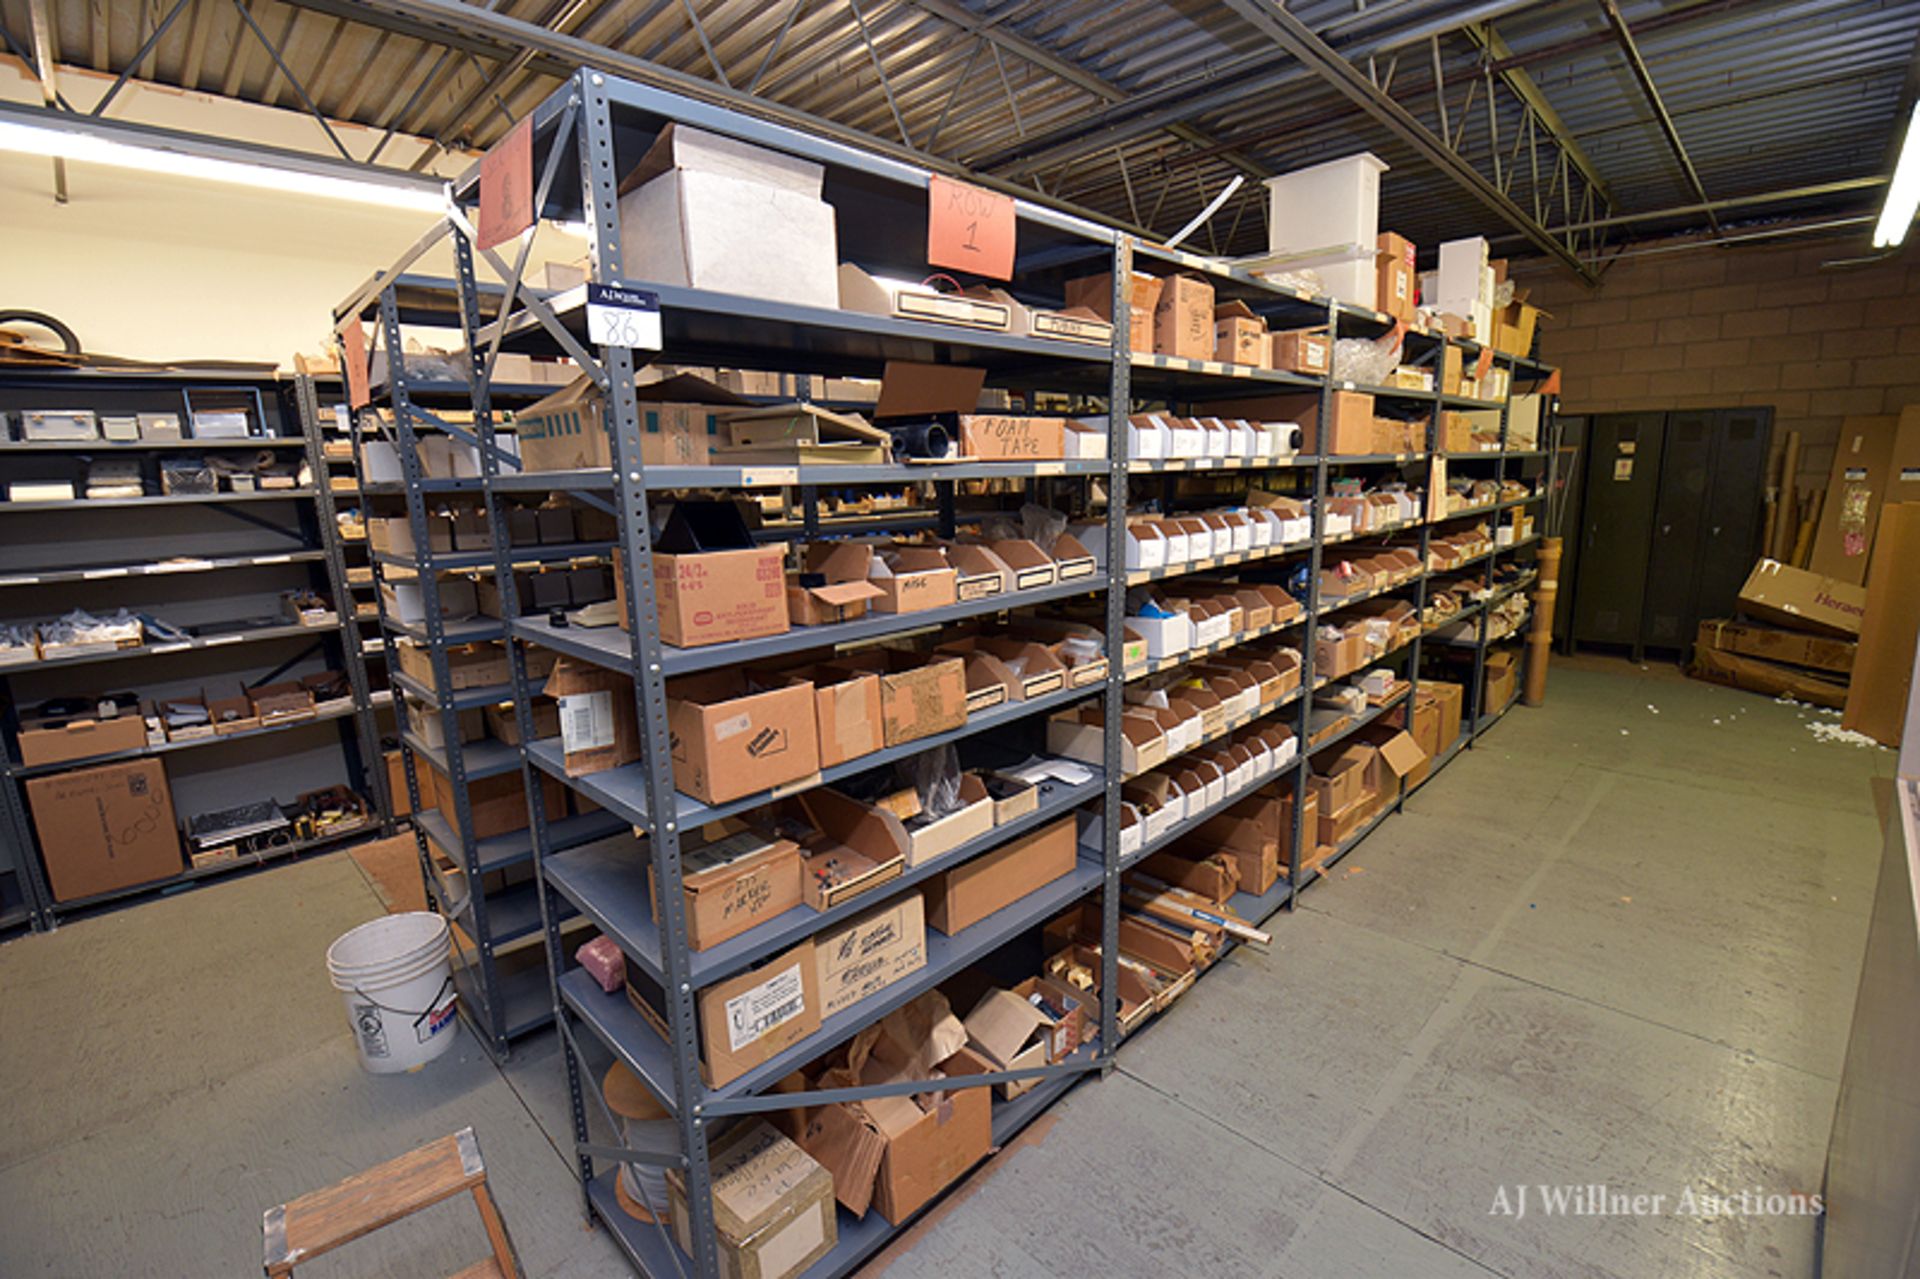 (5) Shelving Units Of Laser Components, water fittings, and linear motion parts etc.